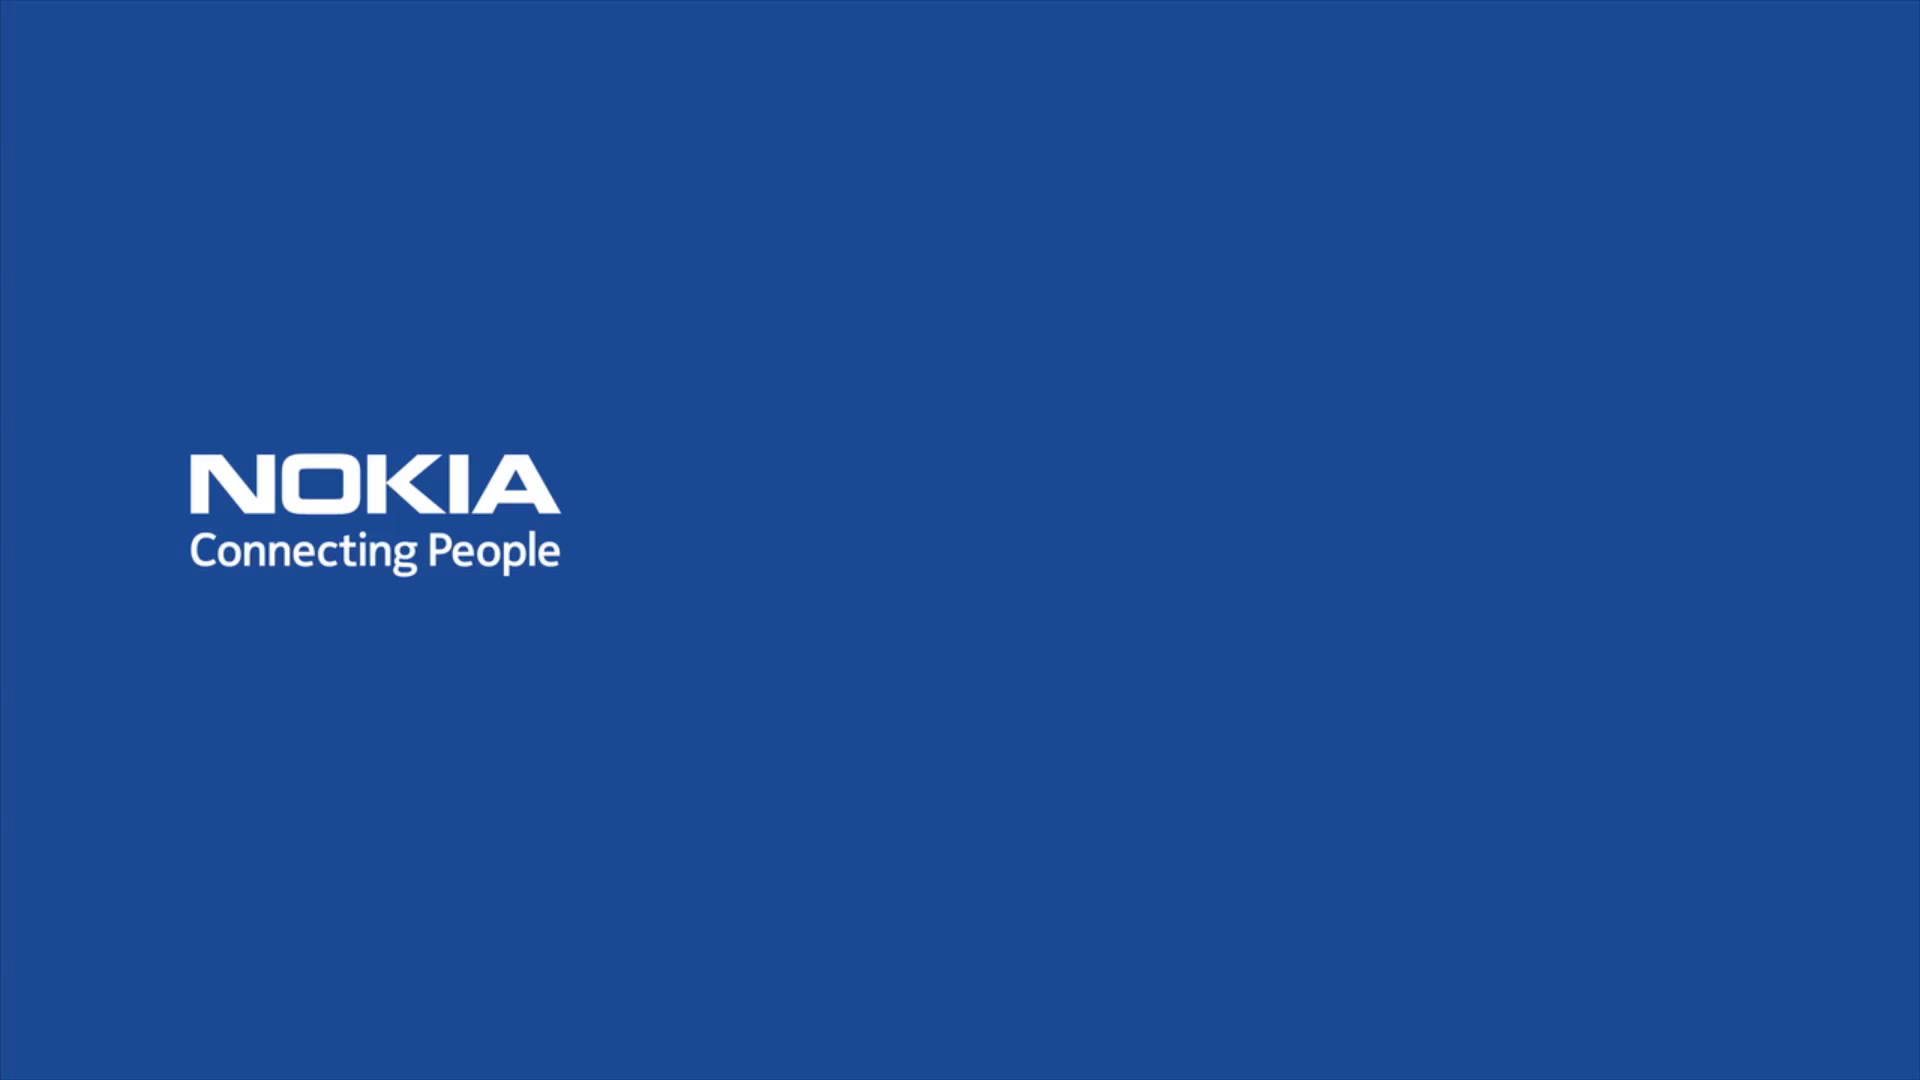 Nokia S Mwc Launch Event Here Everything We Know